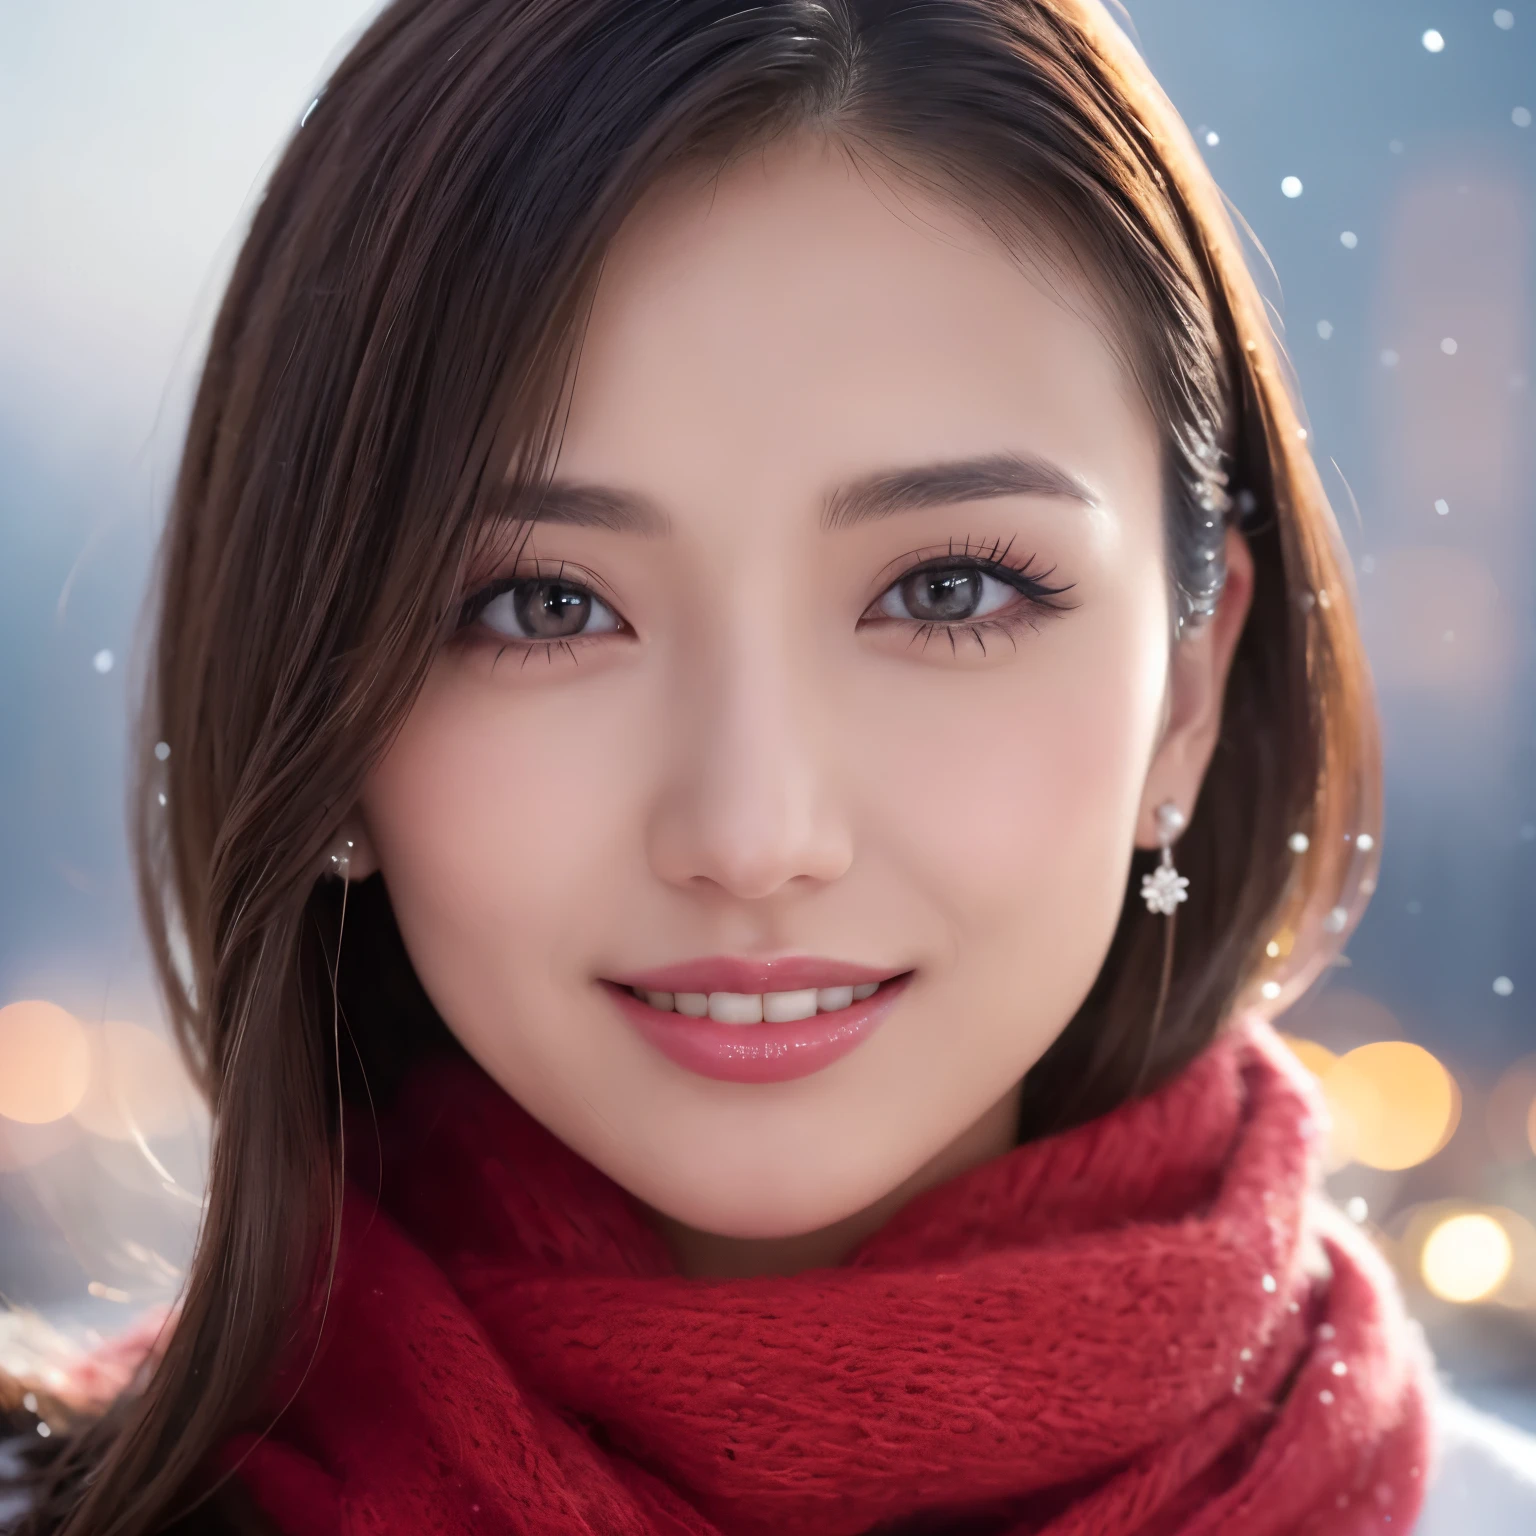 ((highest quality、table top、8K、best image quality、Award-winning work))、one beautiful woman、smile looking at me、(close up of face:1.6)、(The perfect and most natural red long scarf:1.2)、(elegant thick white coat:1.1)、epic movie lighting、(romantic love feelings:1.1)、(The most romantic and moody atmosphere:1.1)、winter city、Snowy landscape in the city、(The snow in the air sparkles finely:1.1)、(It&#39;s snowing heavily:1.1)、(Tyndall effect:1.1)、(Night view of the city with snow falling:1.2)、Shining beautiful skin、(accurate anatomy:1.1)、Ultra high definition beauty face、long eyelashes、natural makeup、ultra high definition hair、Ultra high definition eyes、(Shining beautiful skin with ultra-high resolution:1.1)、Super high resolution glossy lips、radiant beautiful skin